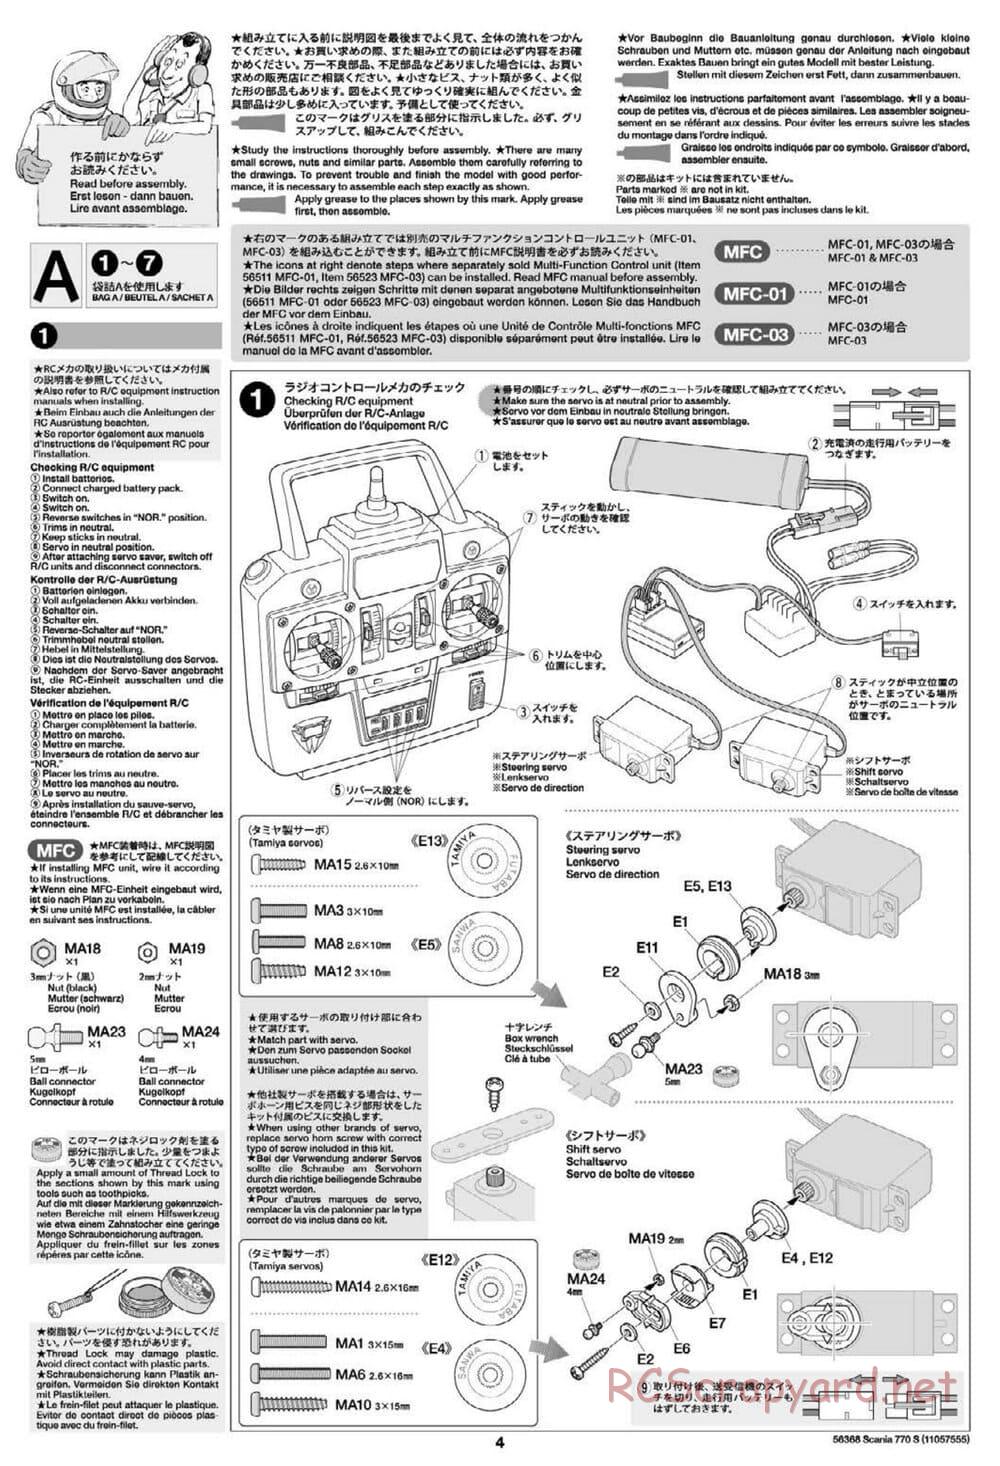 Tamiya - Scania 770S 6x4 Tractor Truck Chassis - Manual - Page 4